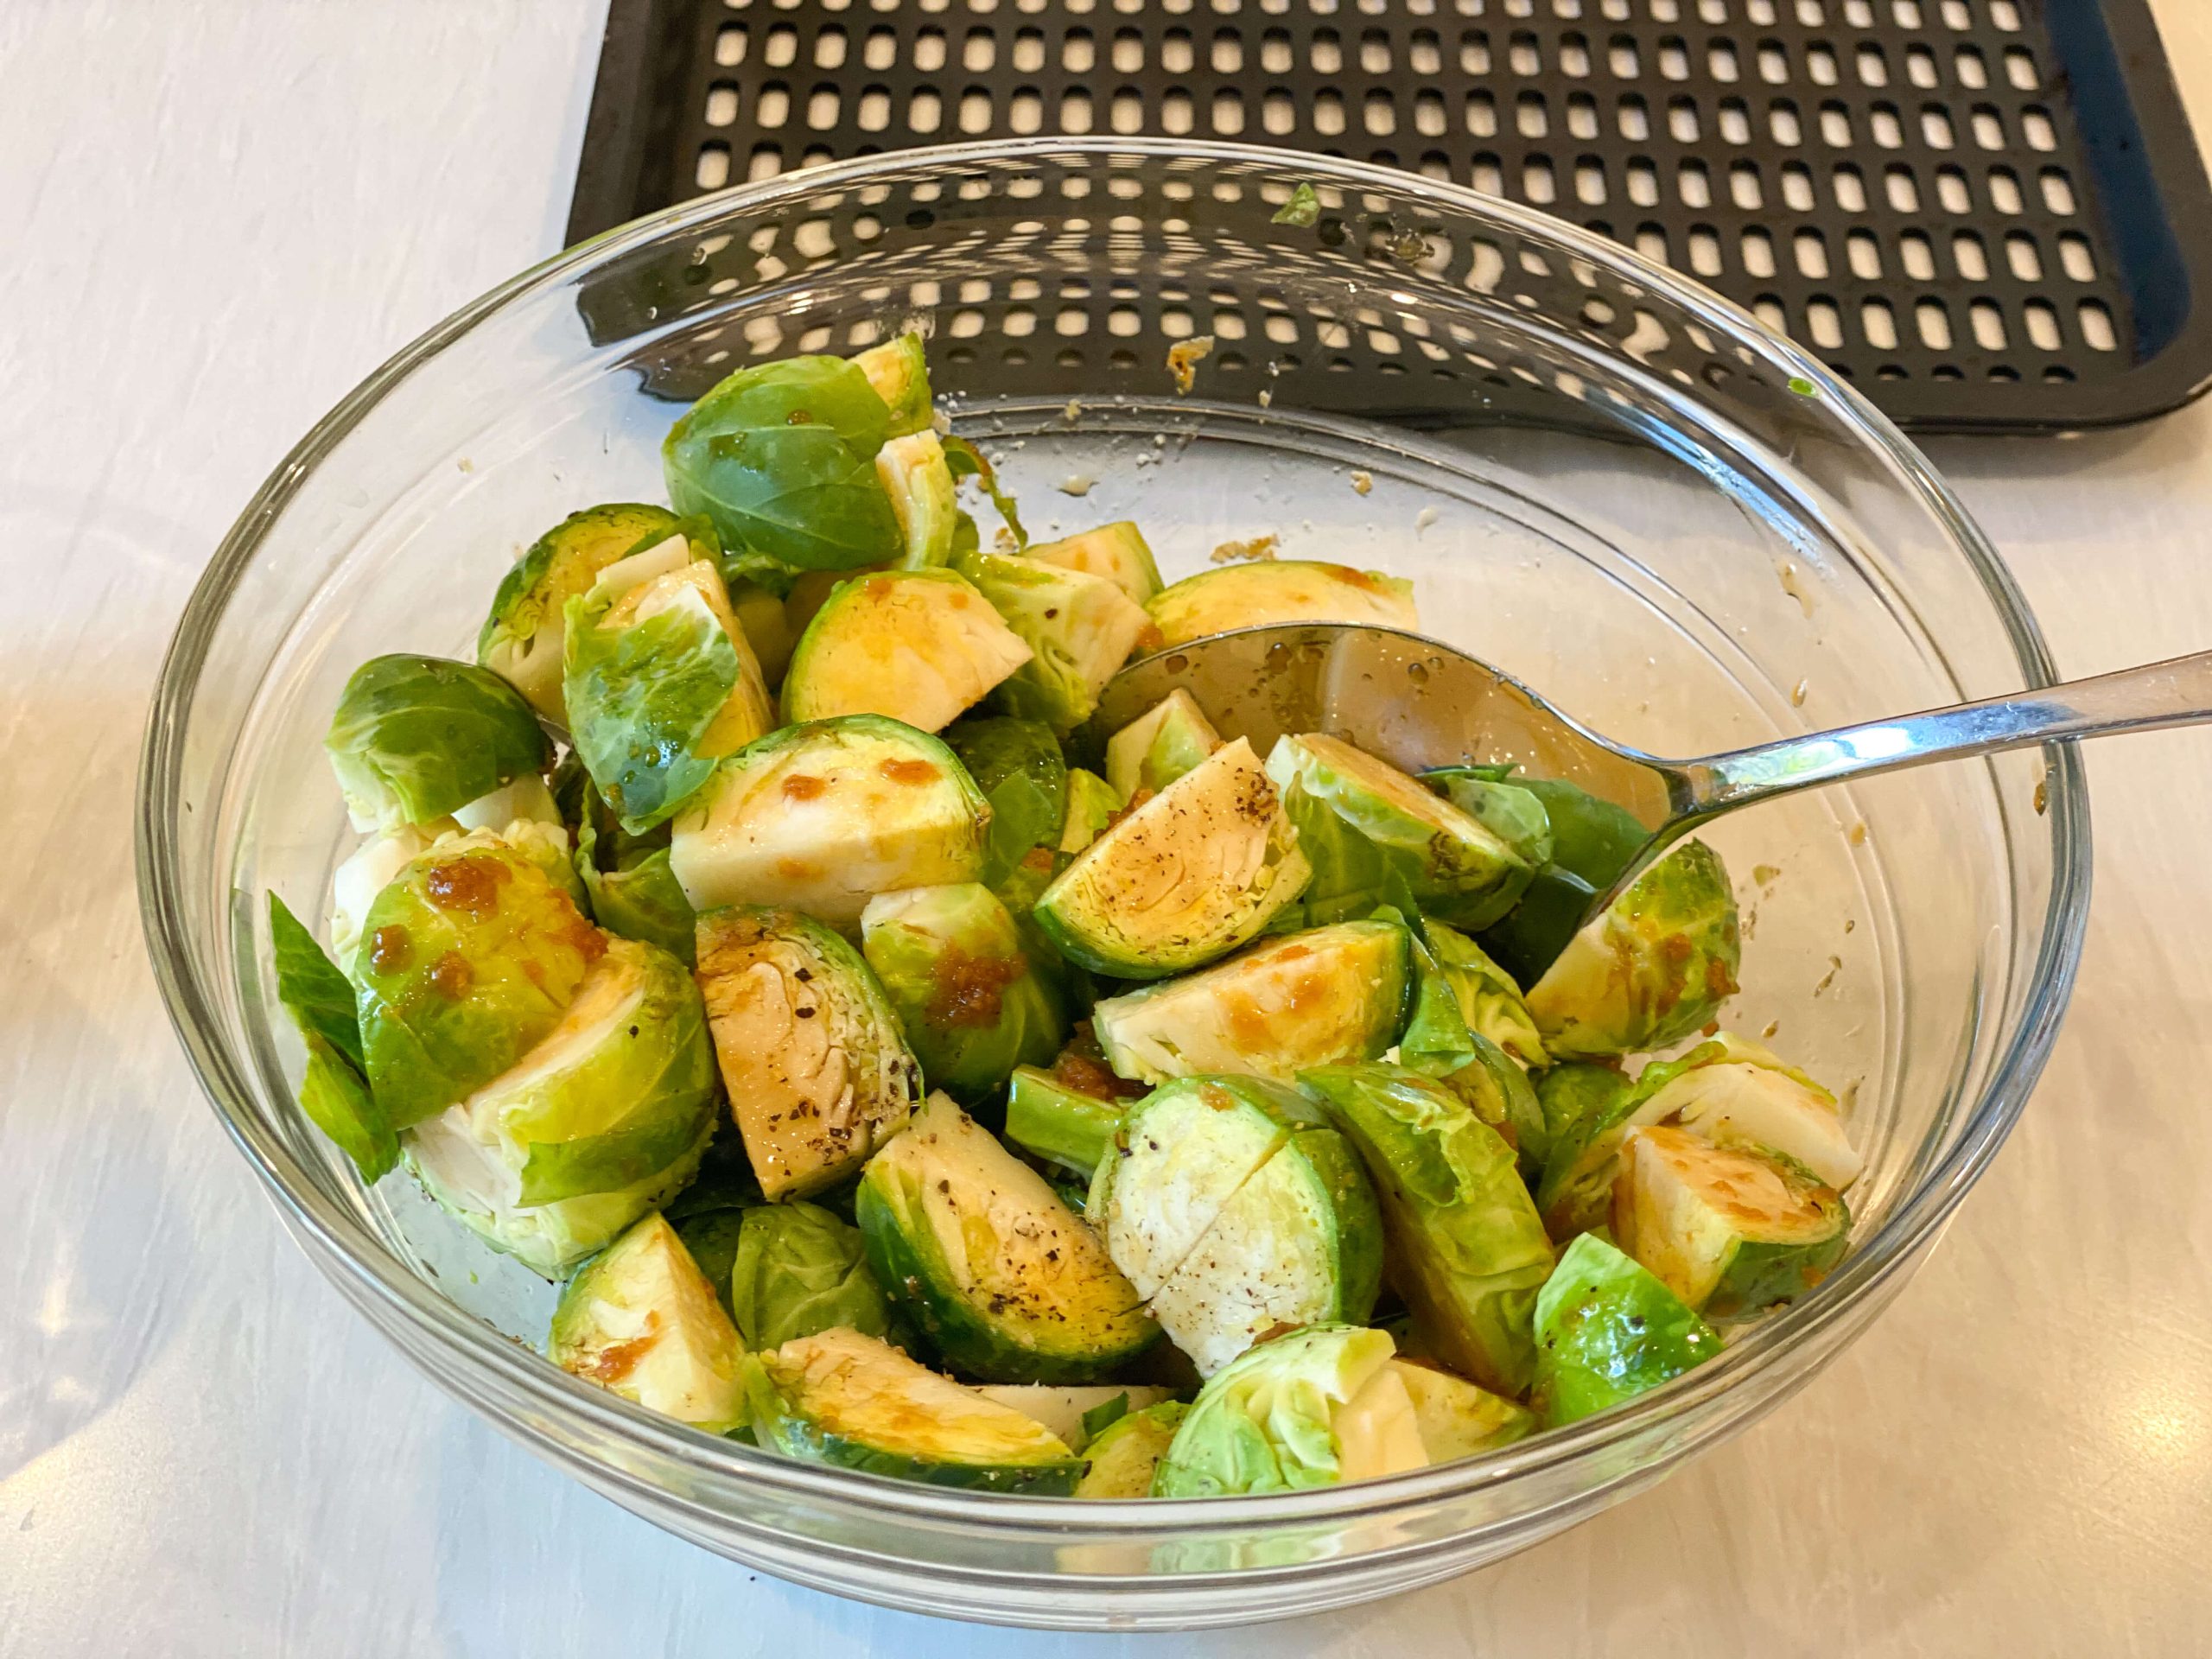 brussel sprouts tossed in soy mixture